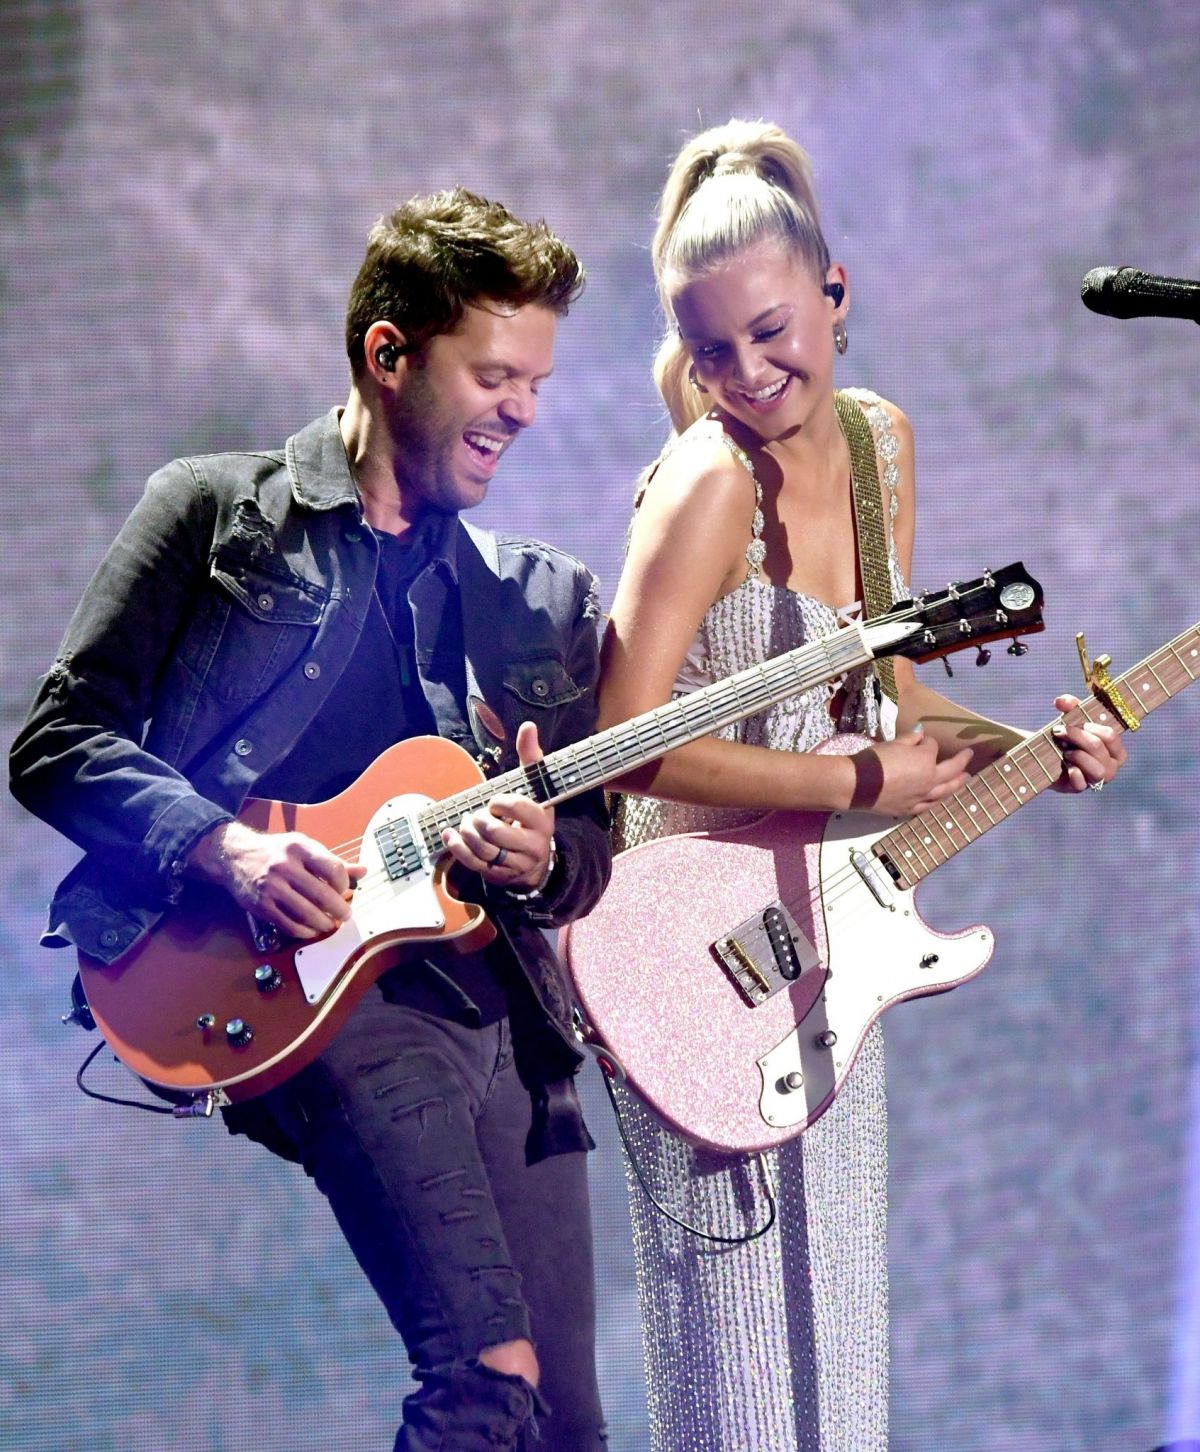 KELSEA BALLERINI at 2020 Iheartcountry Festival Presented by Capital